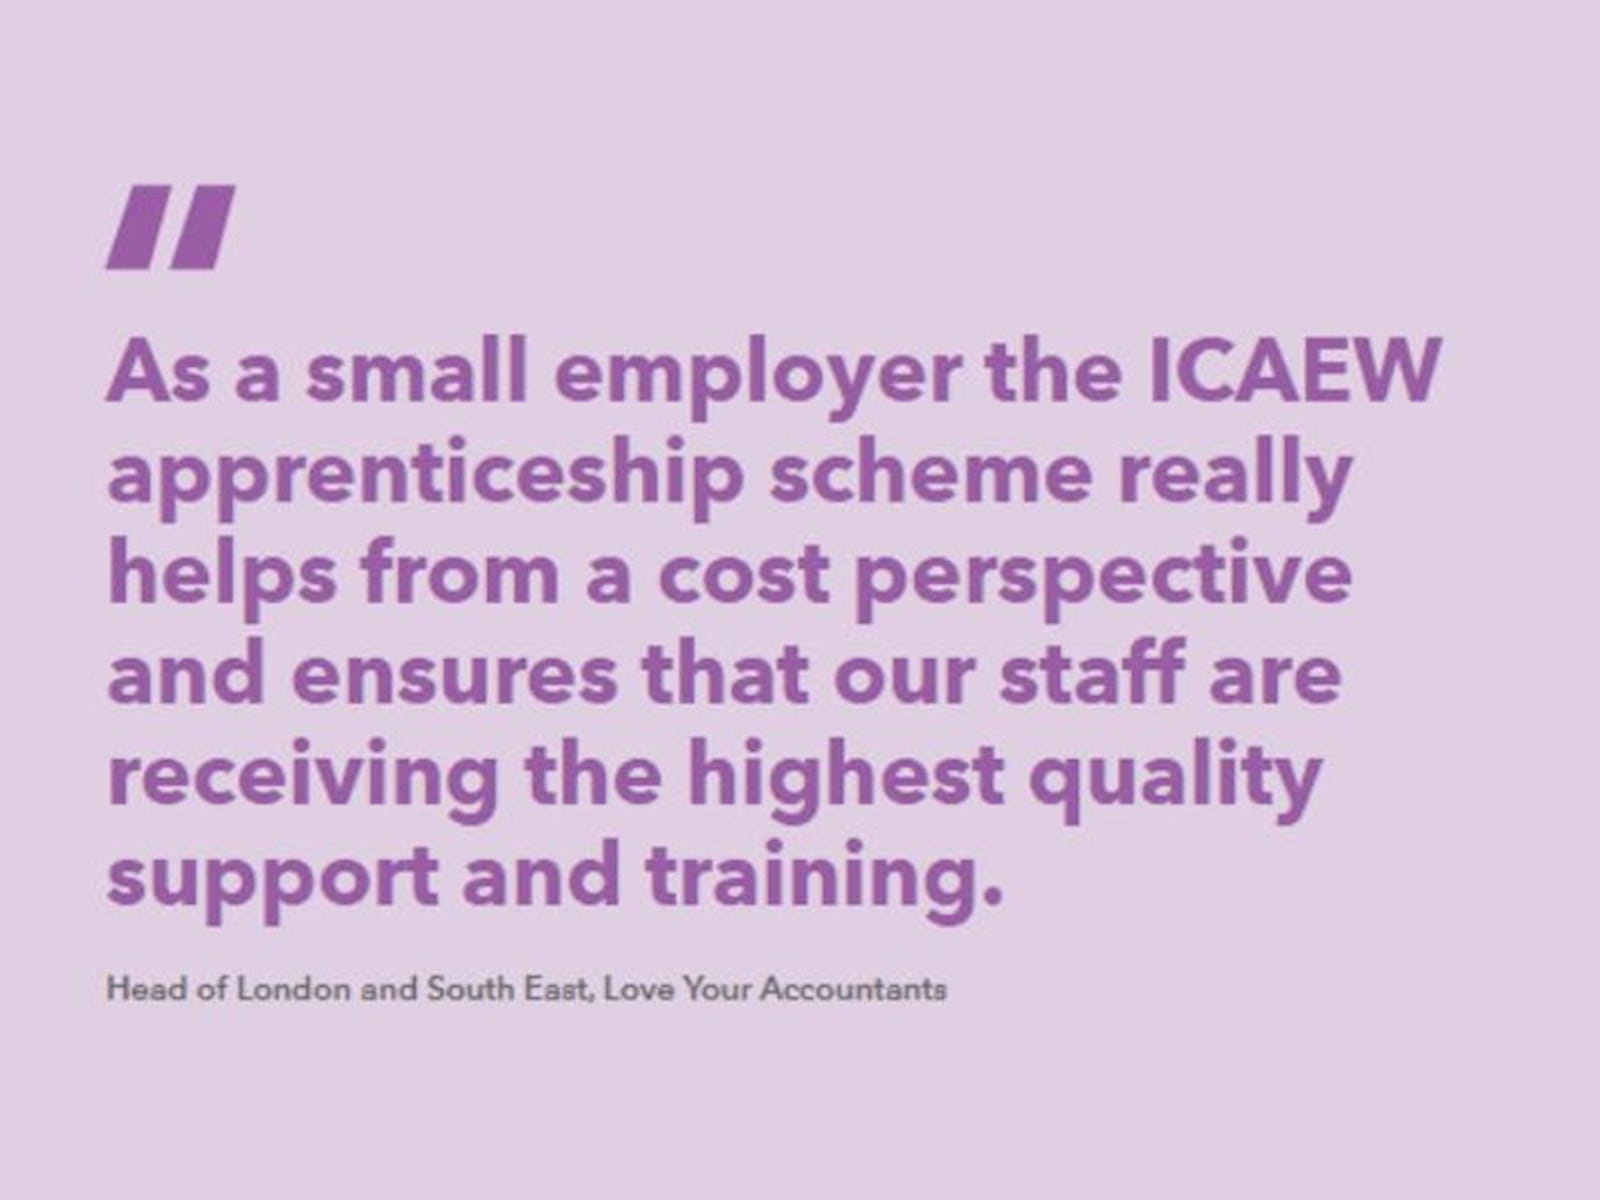 Quote from love your accountants: “As a small employer the ICAEW apprenticeship scheme really helps from a cost perspective and ensures that our staff are receiving the highest quality support and training.”